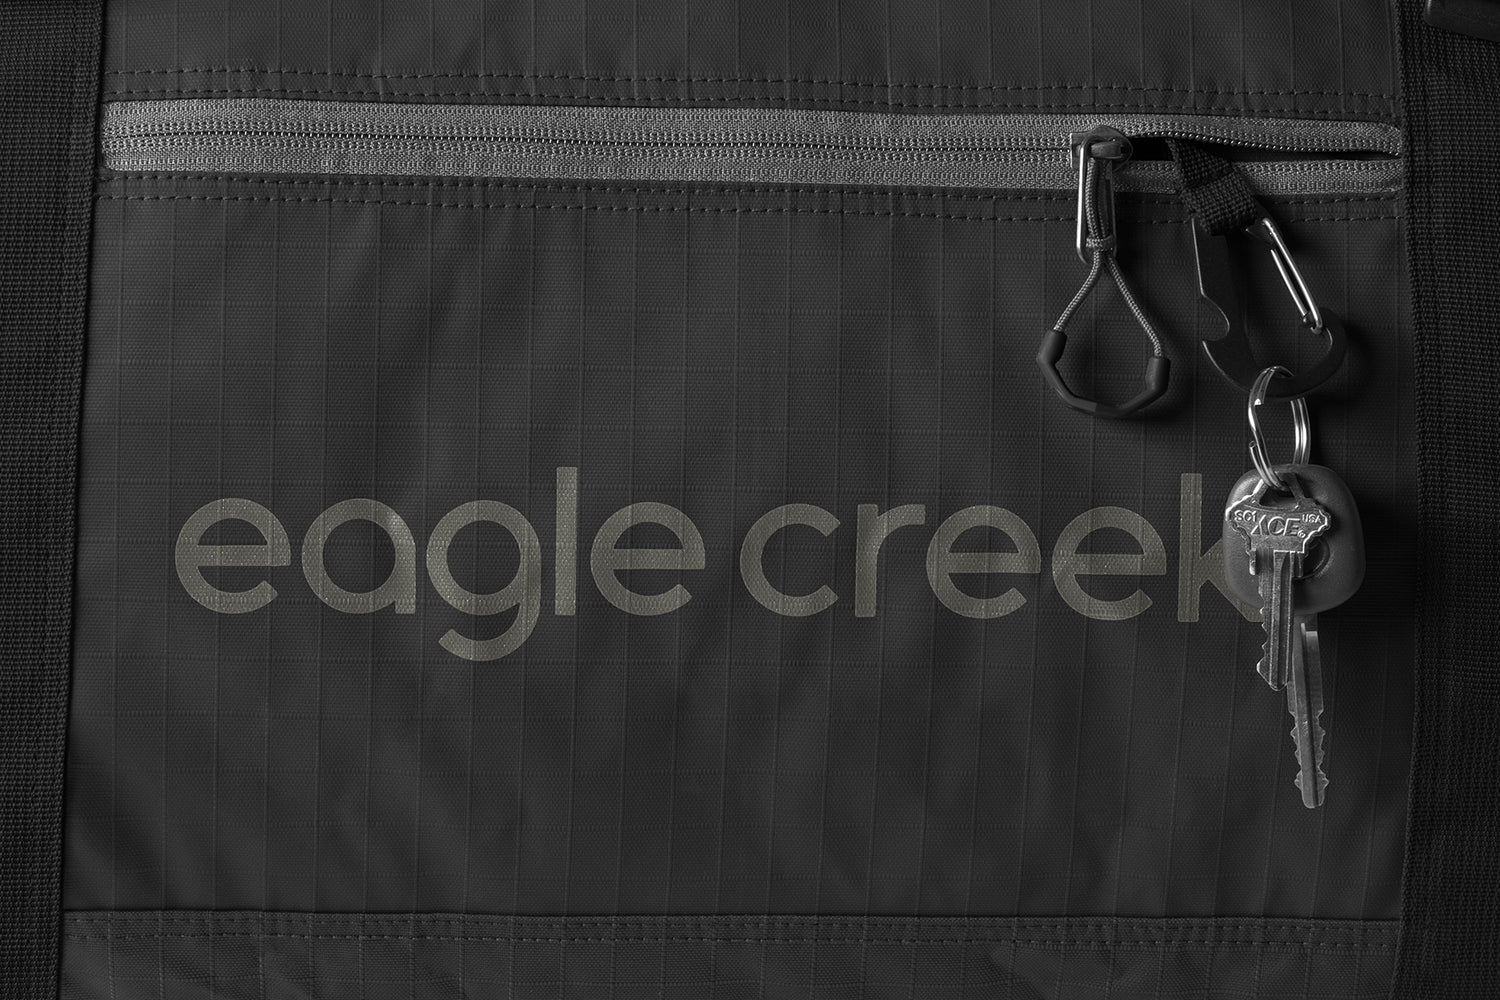 Eagle Creek No Matter What Rolling Duffel Bag L - Featuring Durable  Water-Resistant Fabric, Bar-Tacked Reinforcement, and Heavy Duty Treaded  Wheels